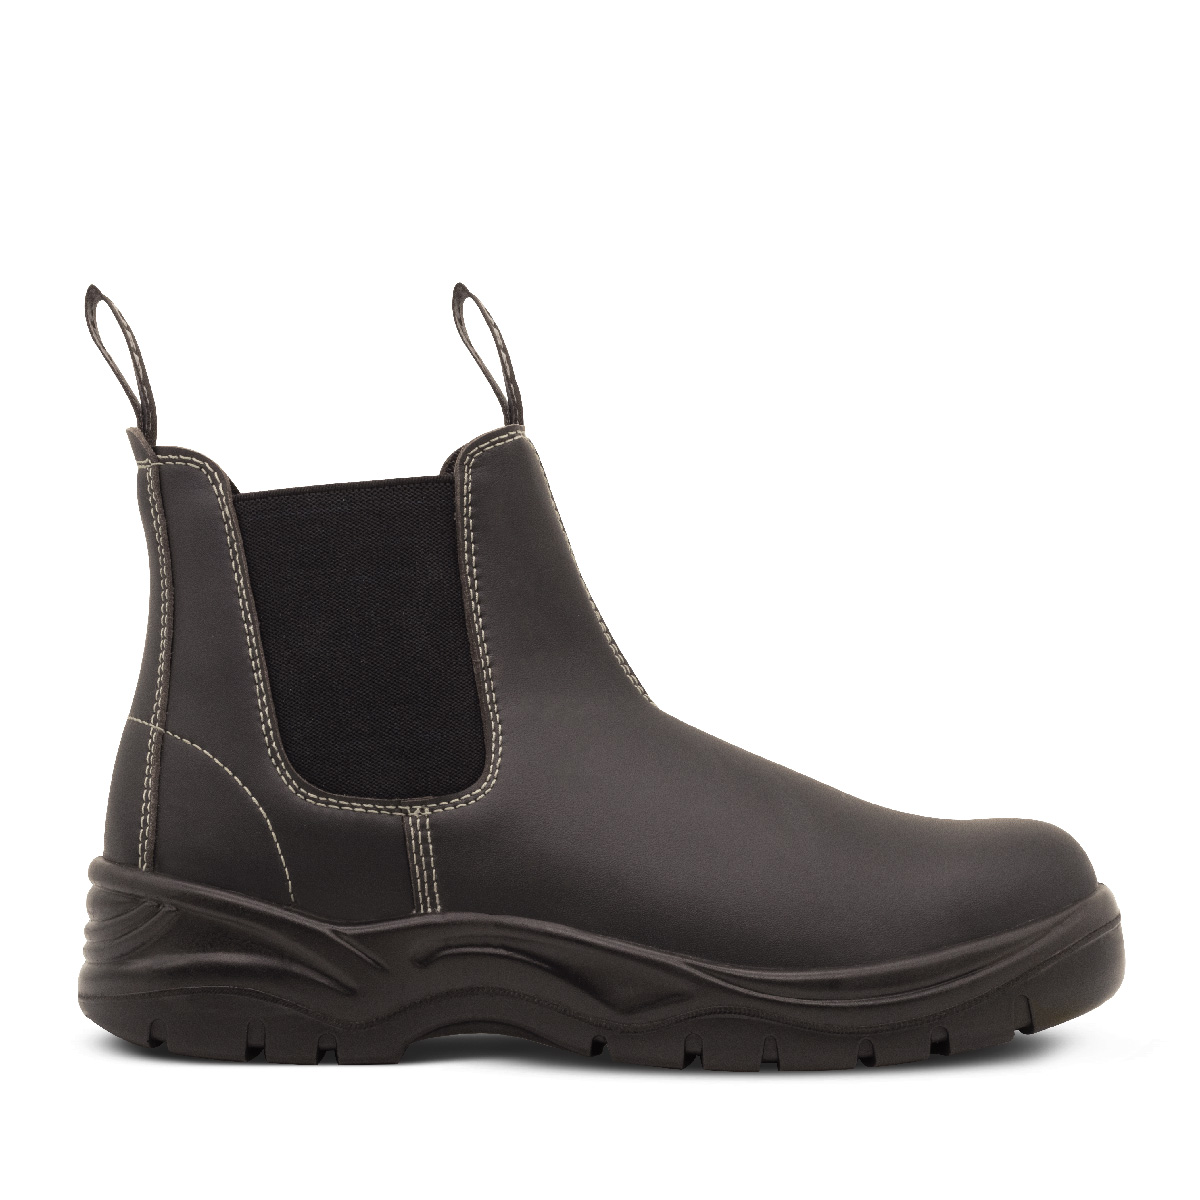 safety chelsea boots